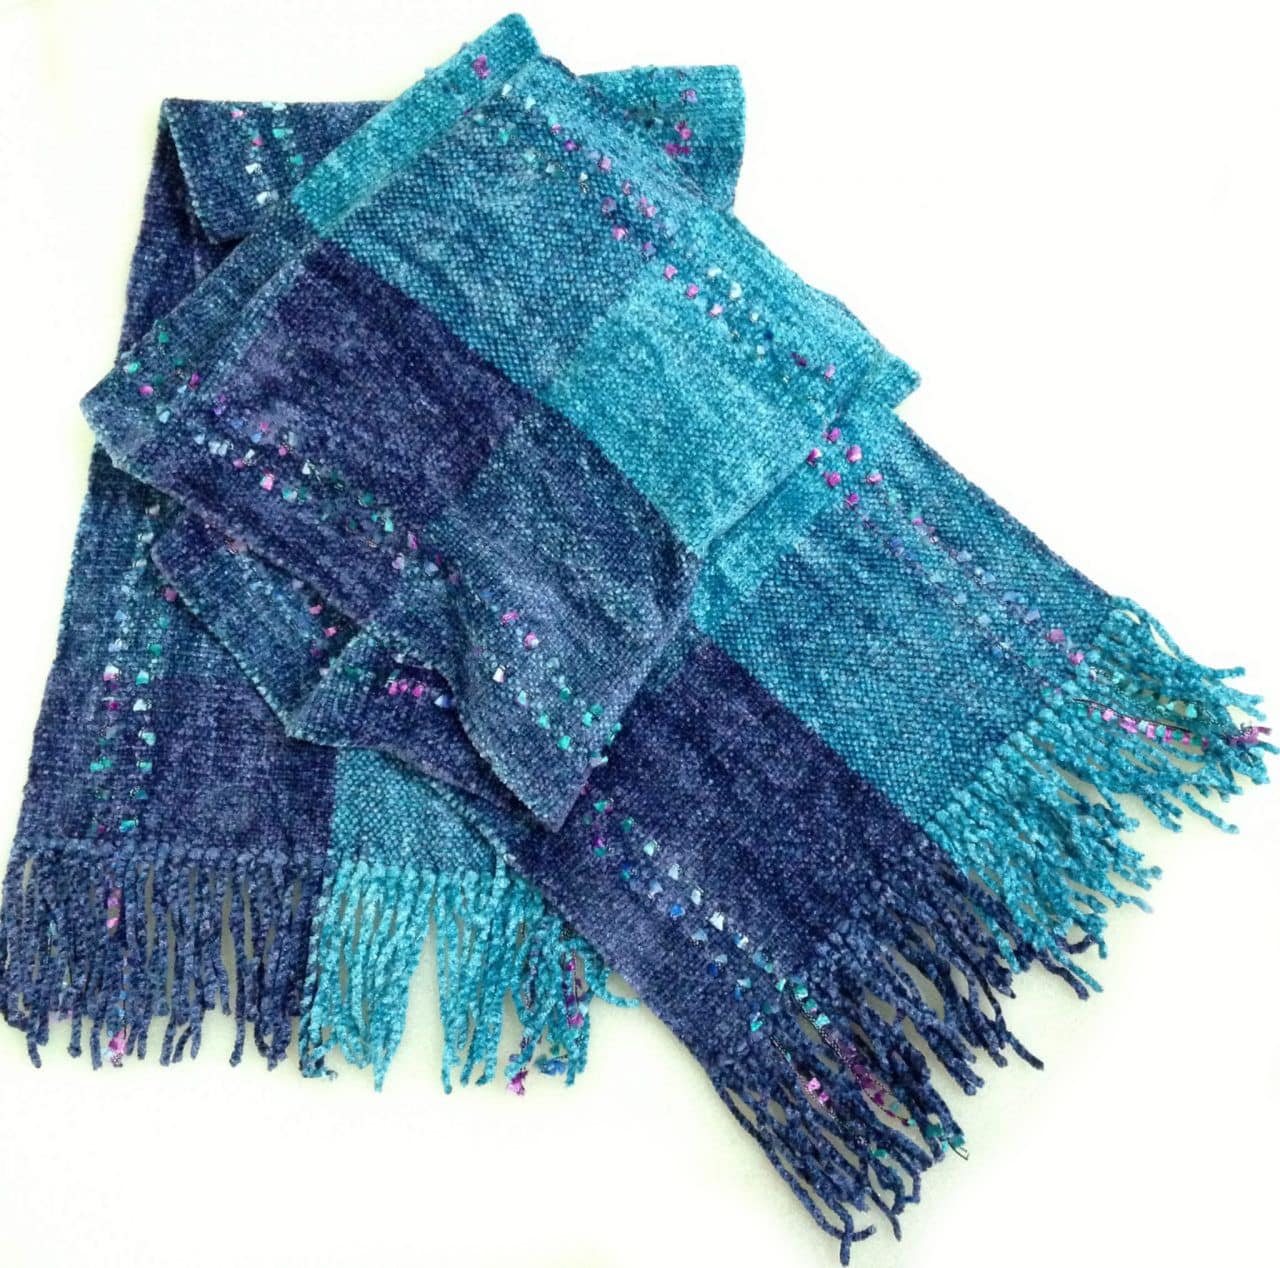 Azure and Celestial Blue with Ornamental Yarn - Bamboo Chenille Handwoven Scarf 8 x 68